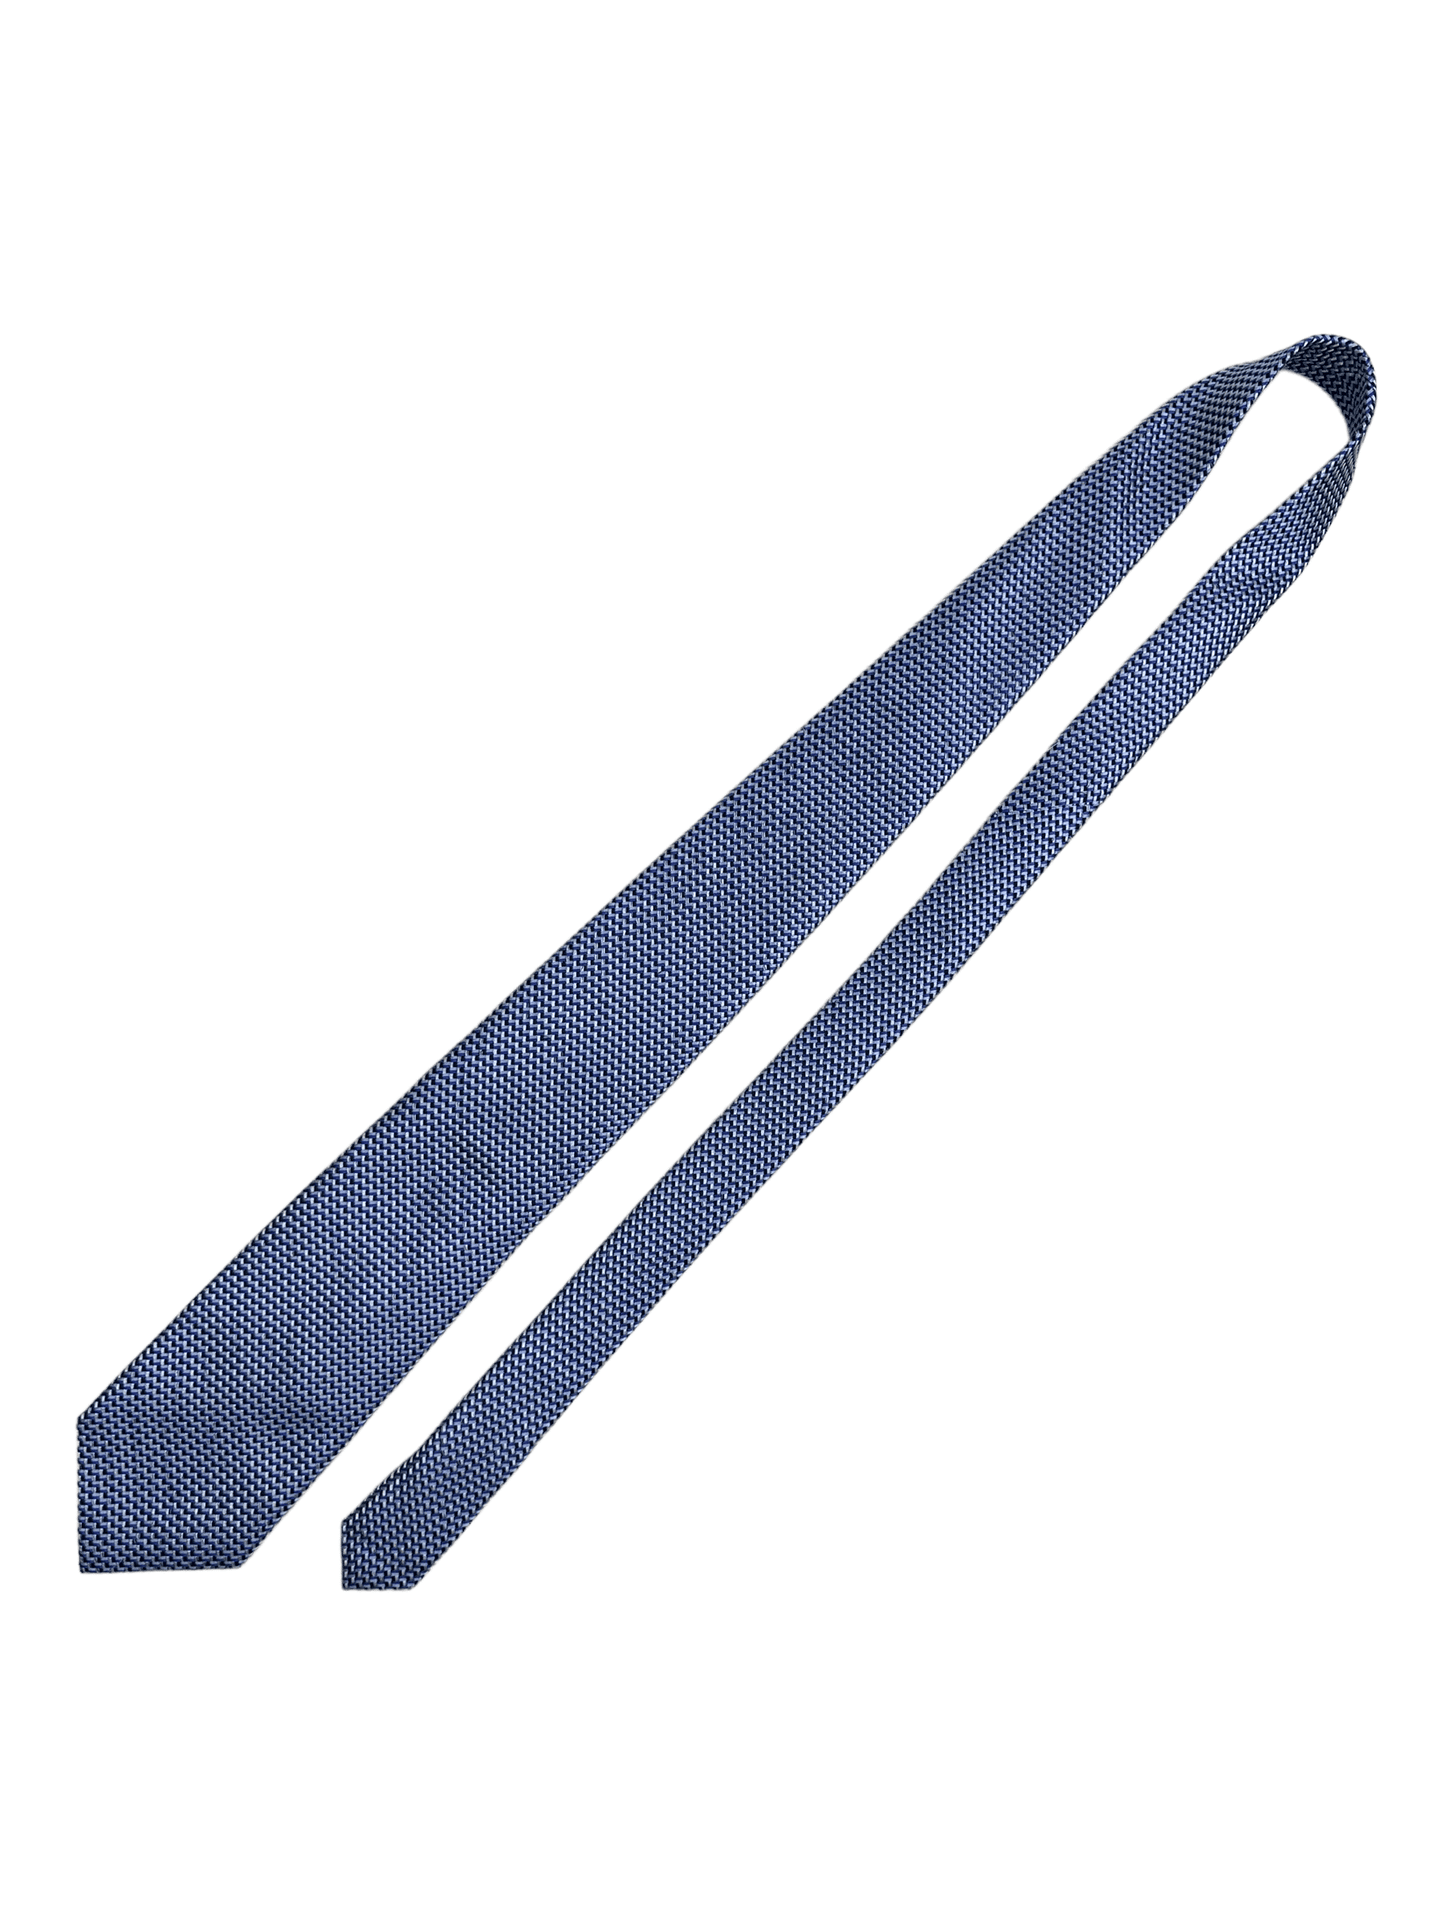 Tom Ford Blue Chevron Silk Tie - Genuine Design luxury consignment Calgary, Alberta, Canada New & pre-owned clothing, shoes, accessories.